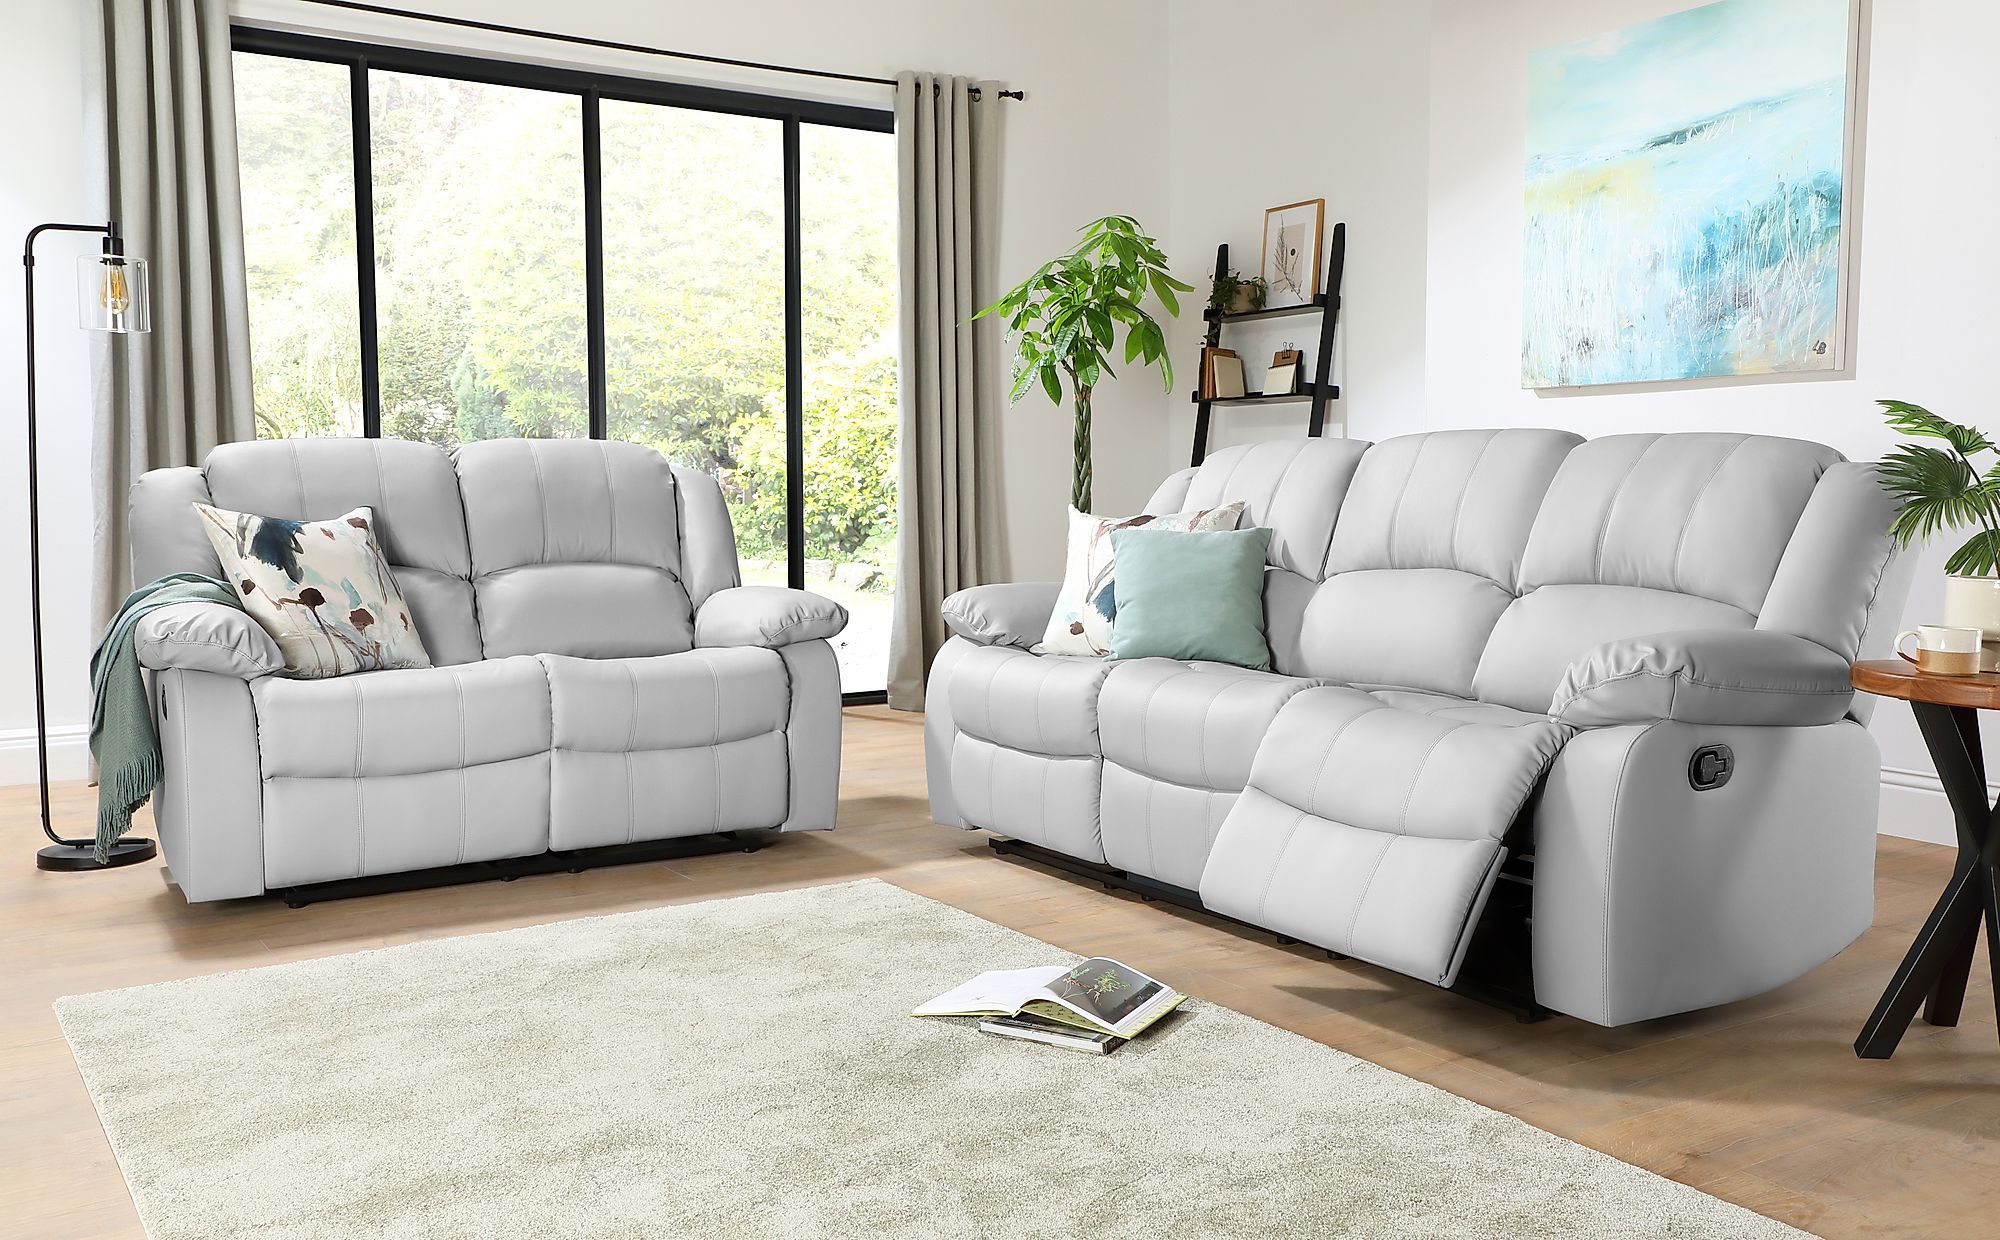 Dakota Light Grey Leather 3+2 Seater Recliner Sofa Set | Furniture Choice With Regard To Sofas In Light Gray (Gallery 10 of 22)